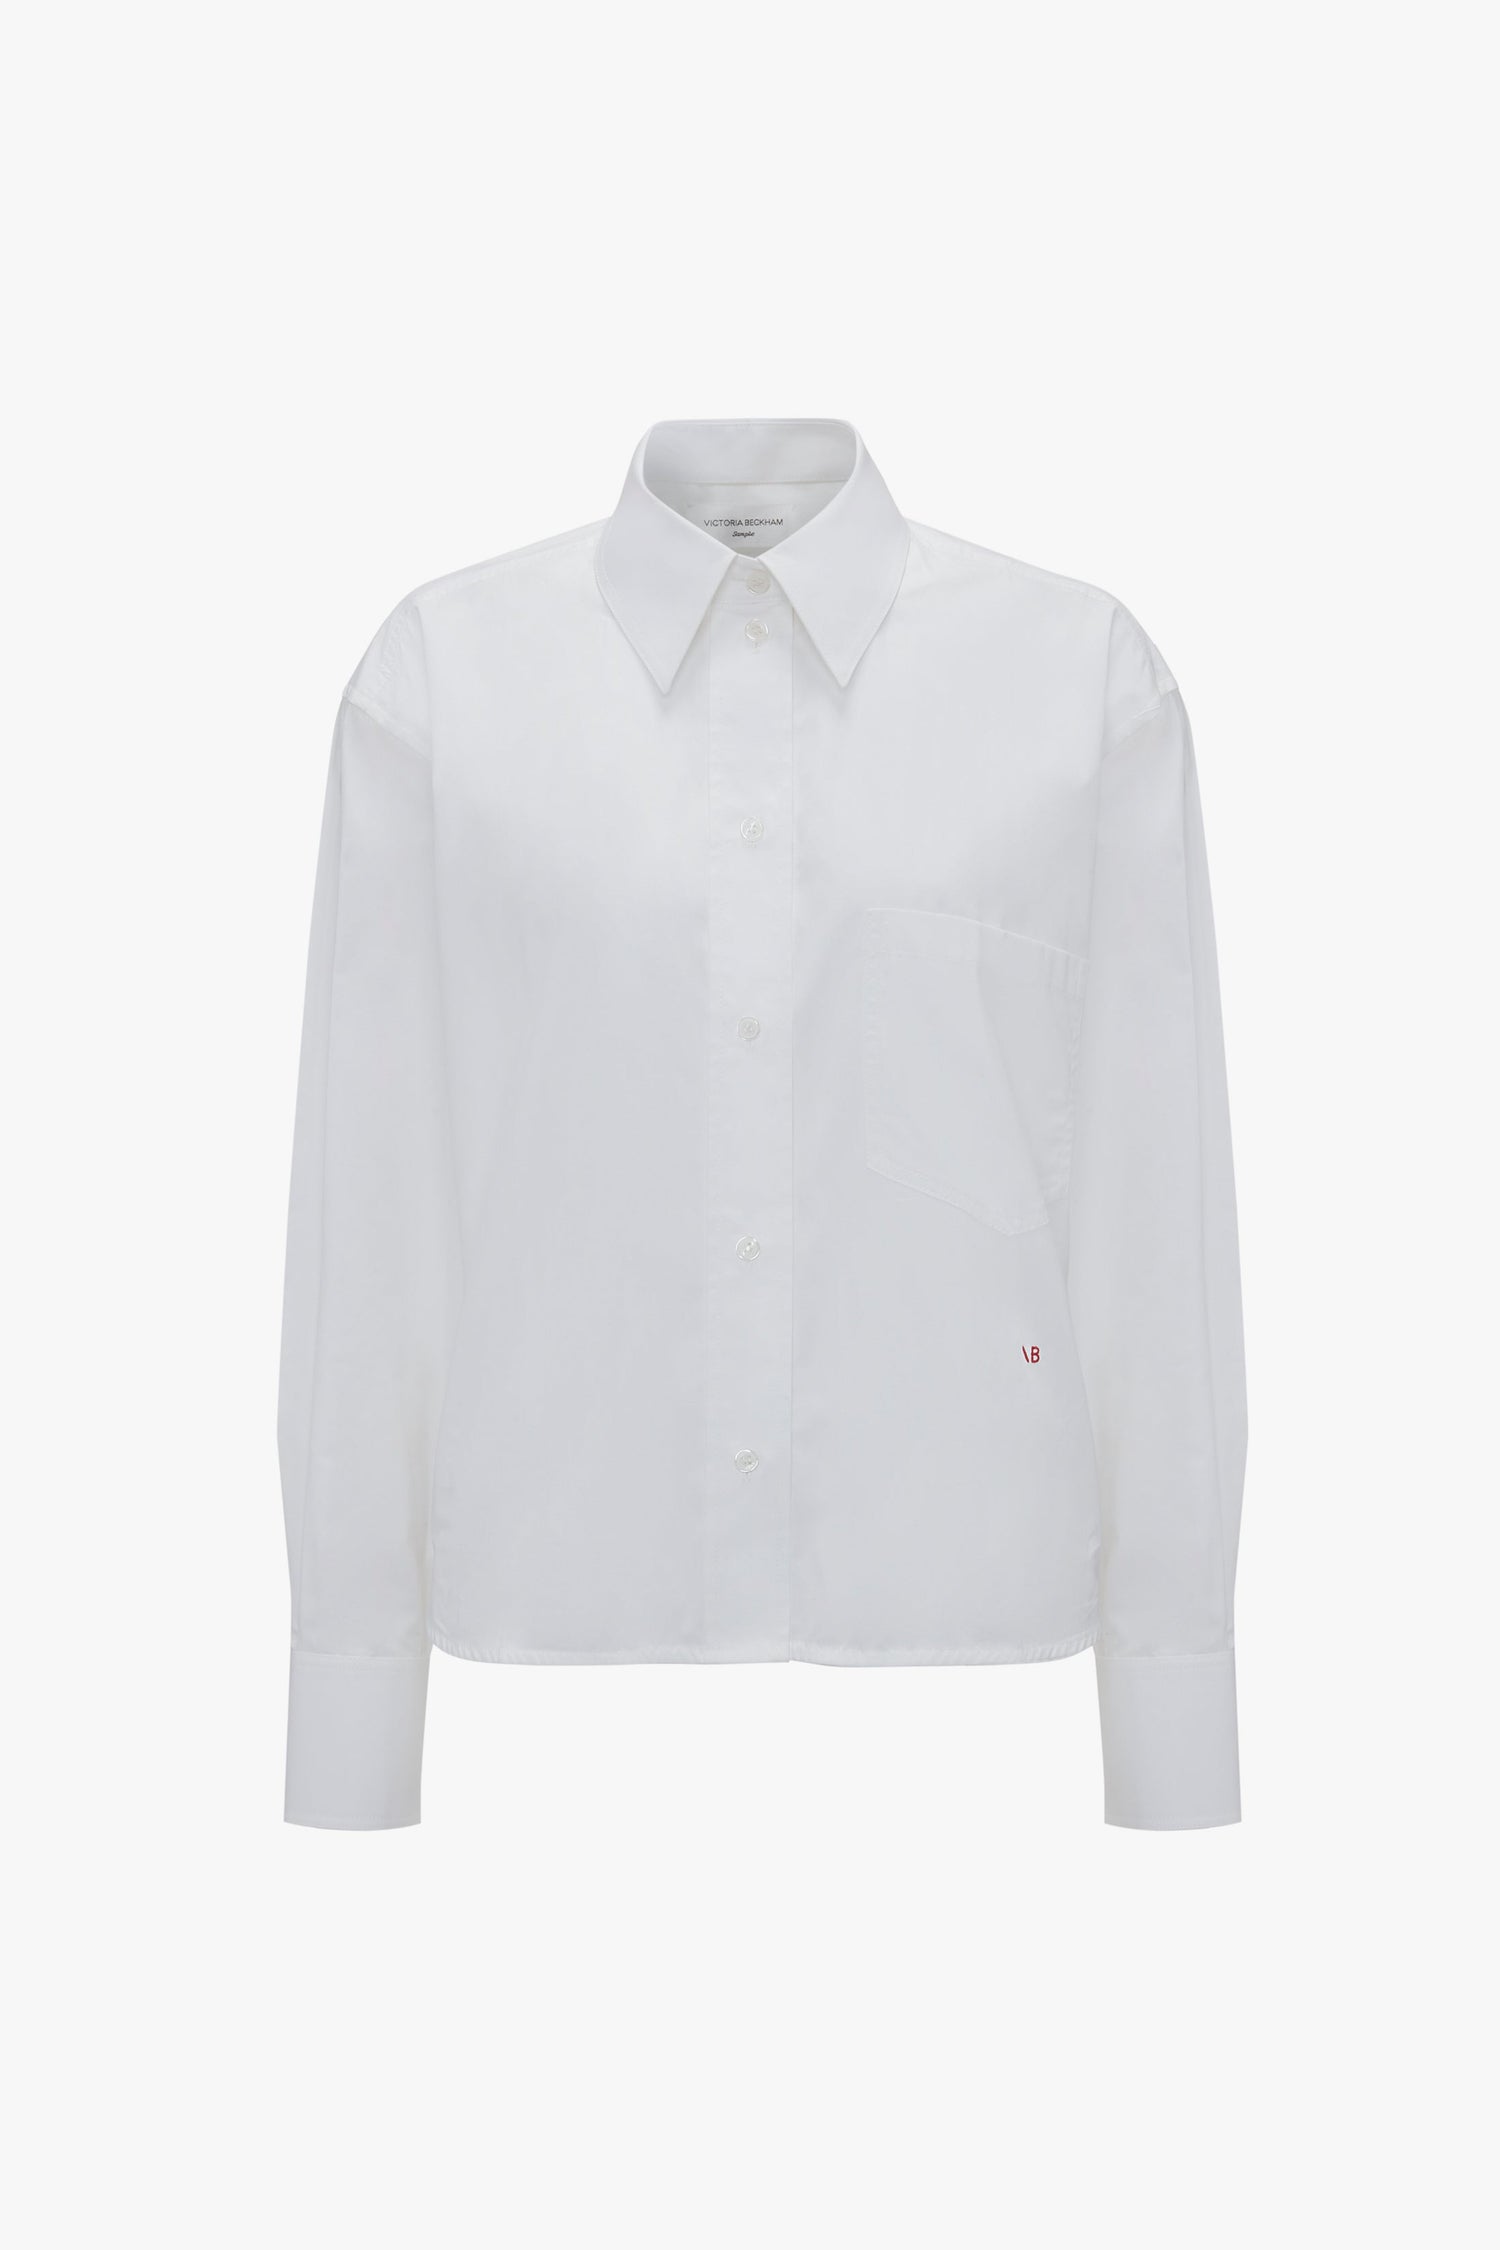 Cropped Long Sleeve Shirt In White with a pointed collar, VB monogram, and a chest pocket, displayed on a plain background by Victoria Beckham.